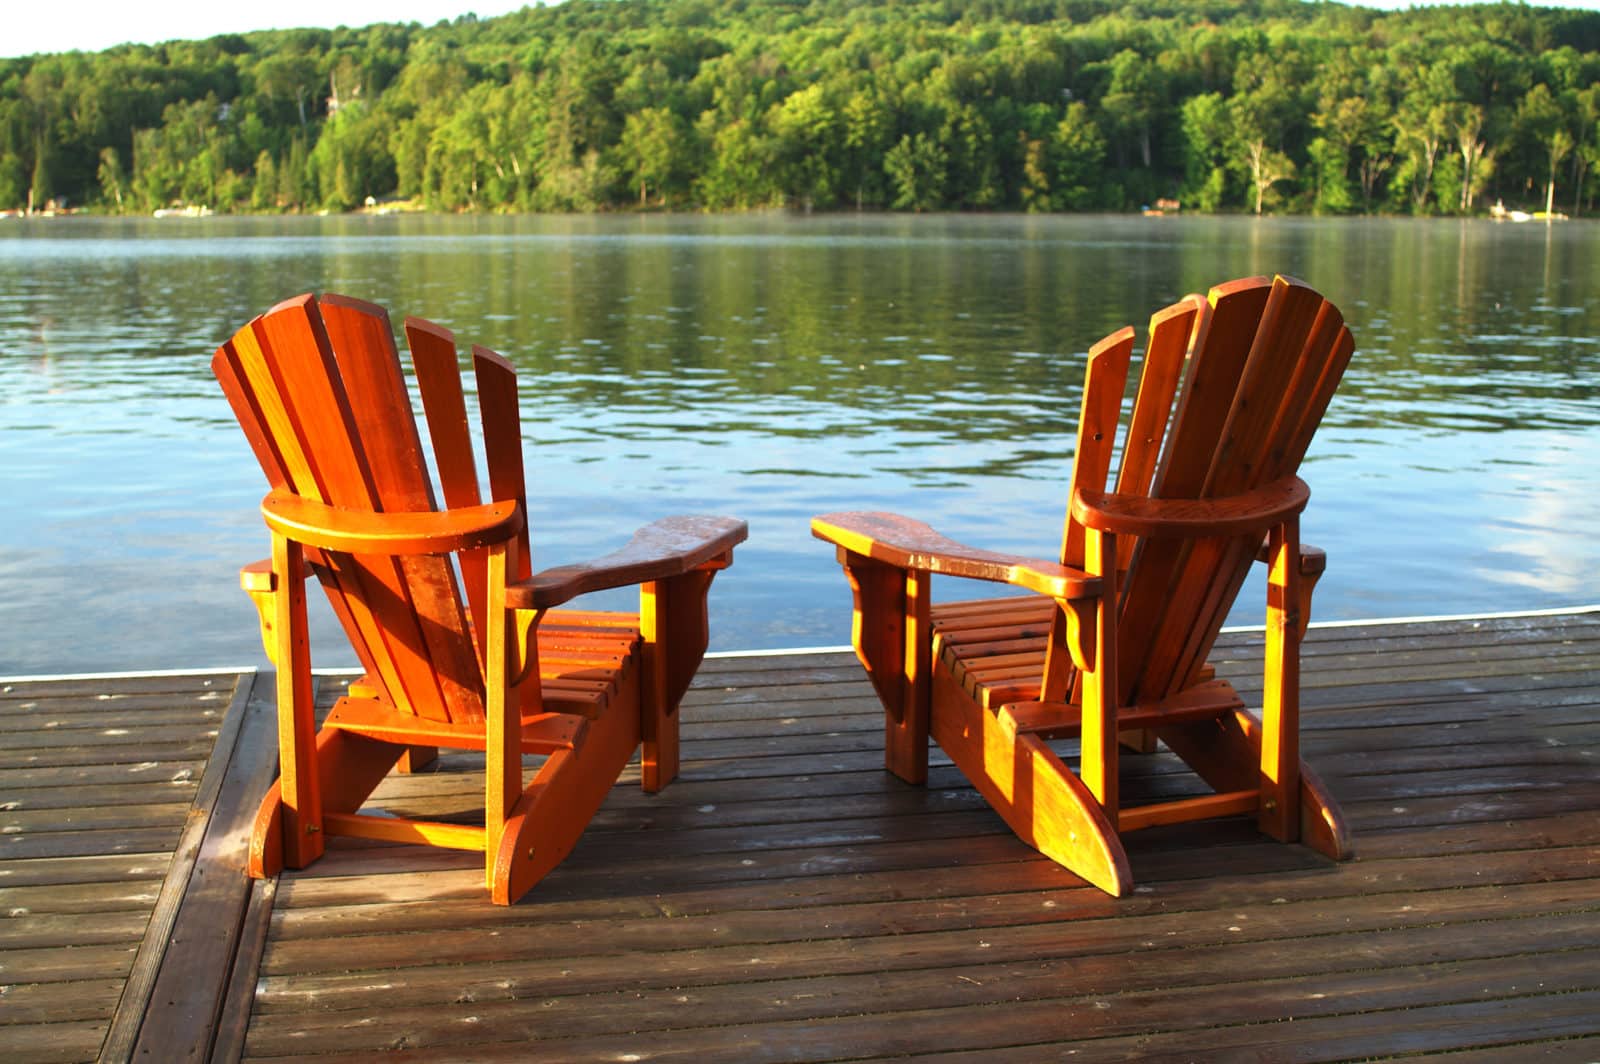 Two Adirondack chairs on deck